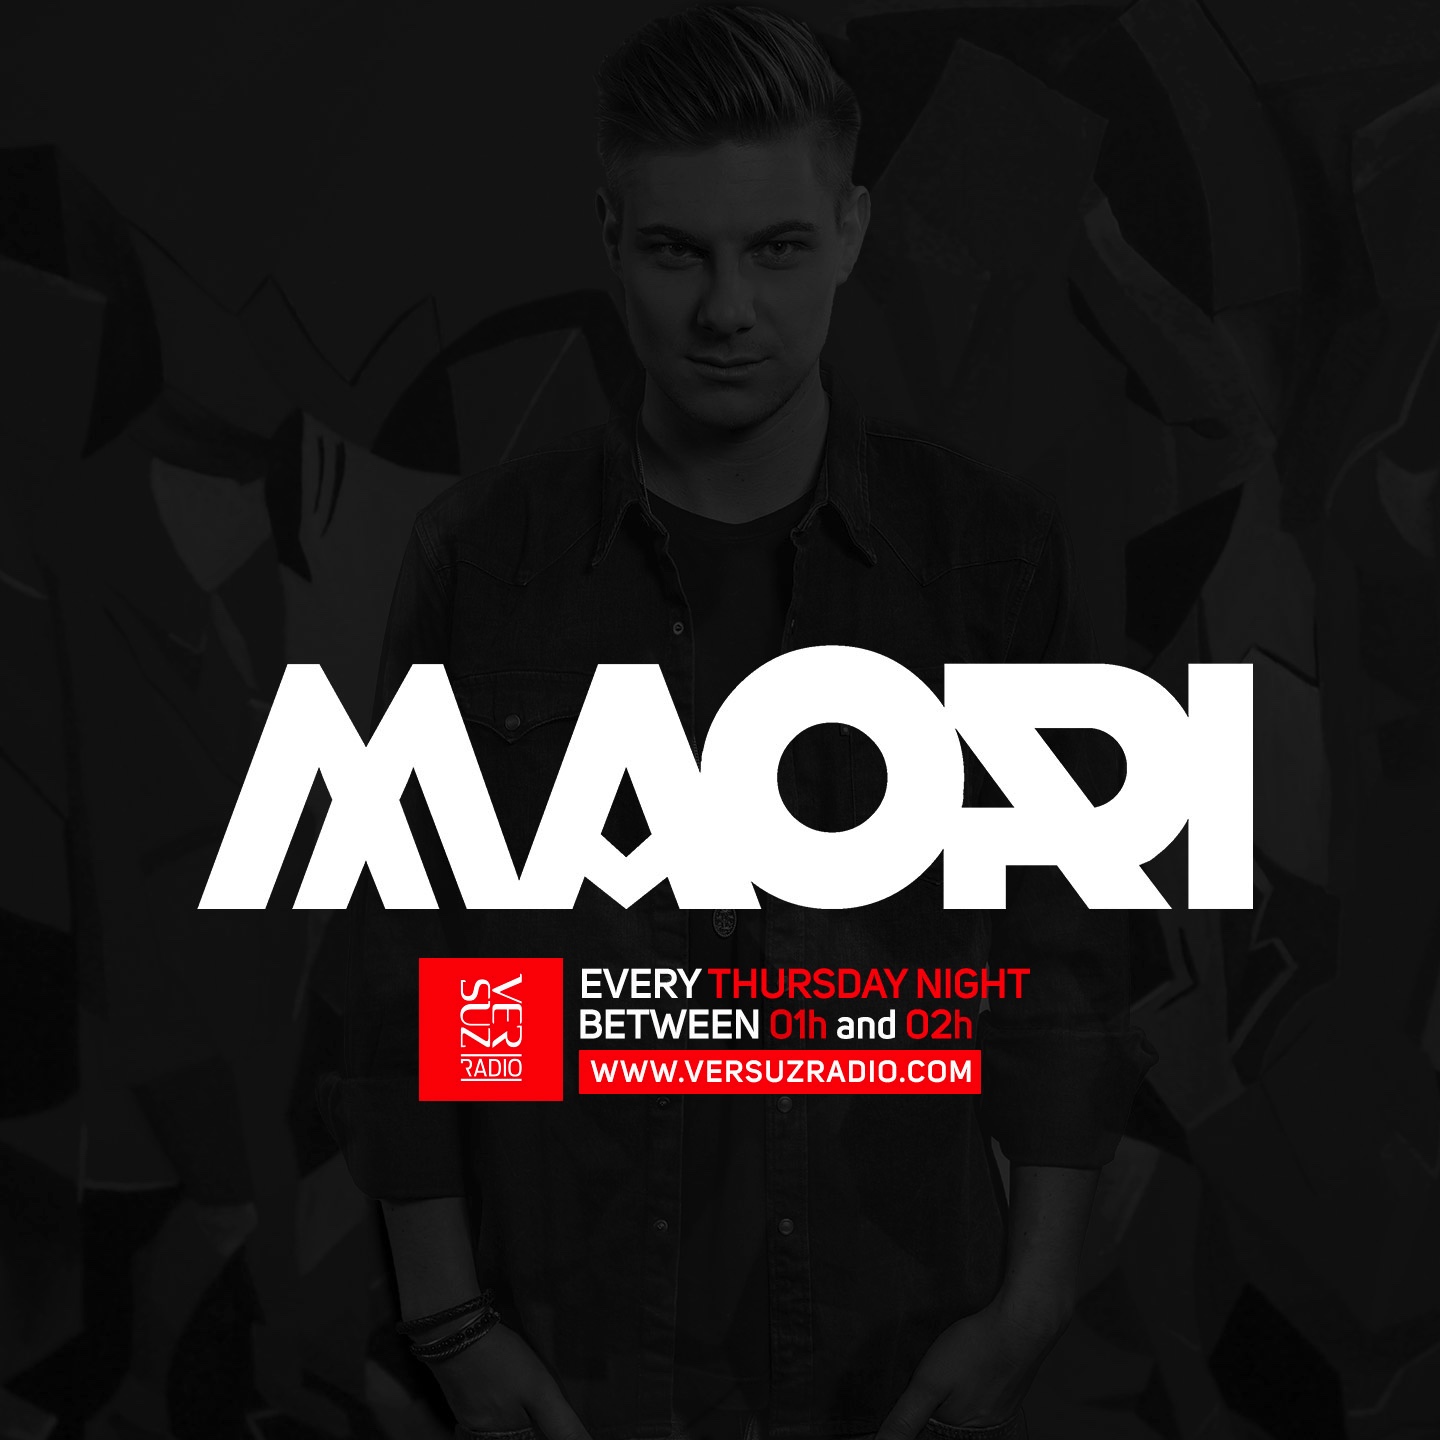 Clubhouse Radio by Maori - Episode #020